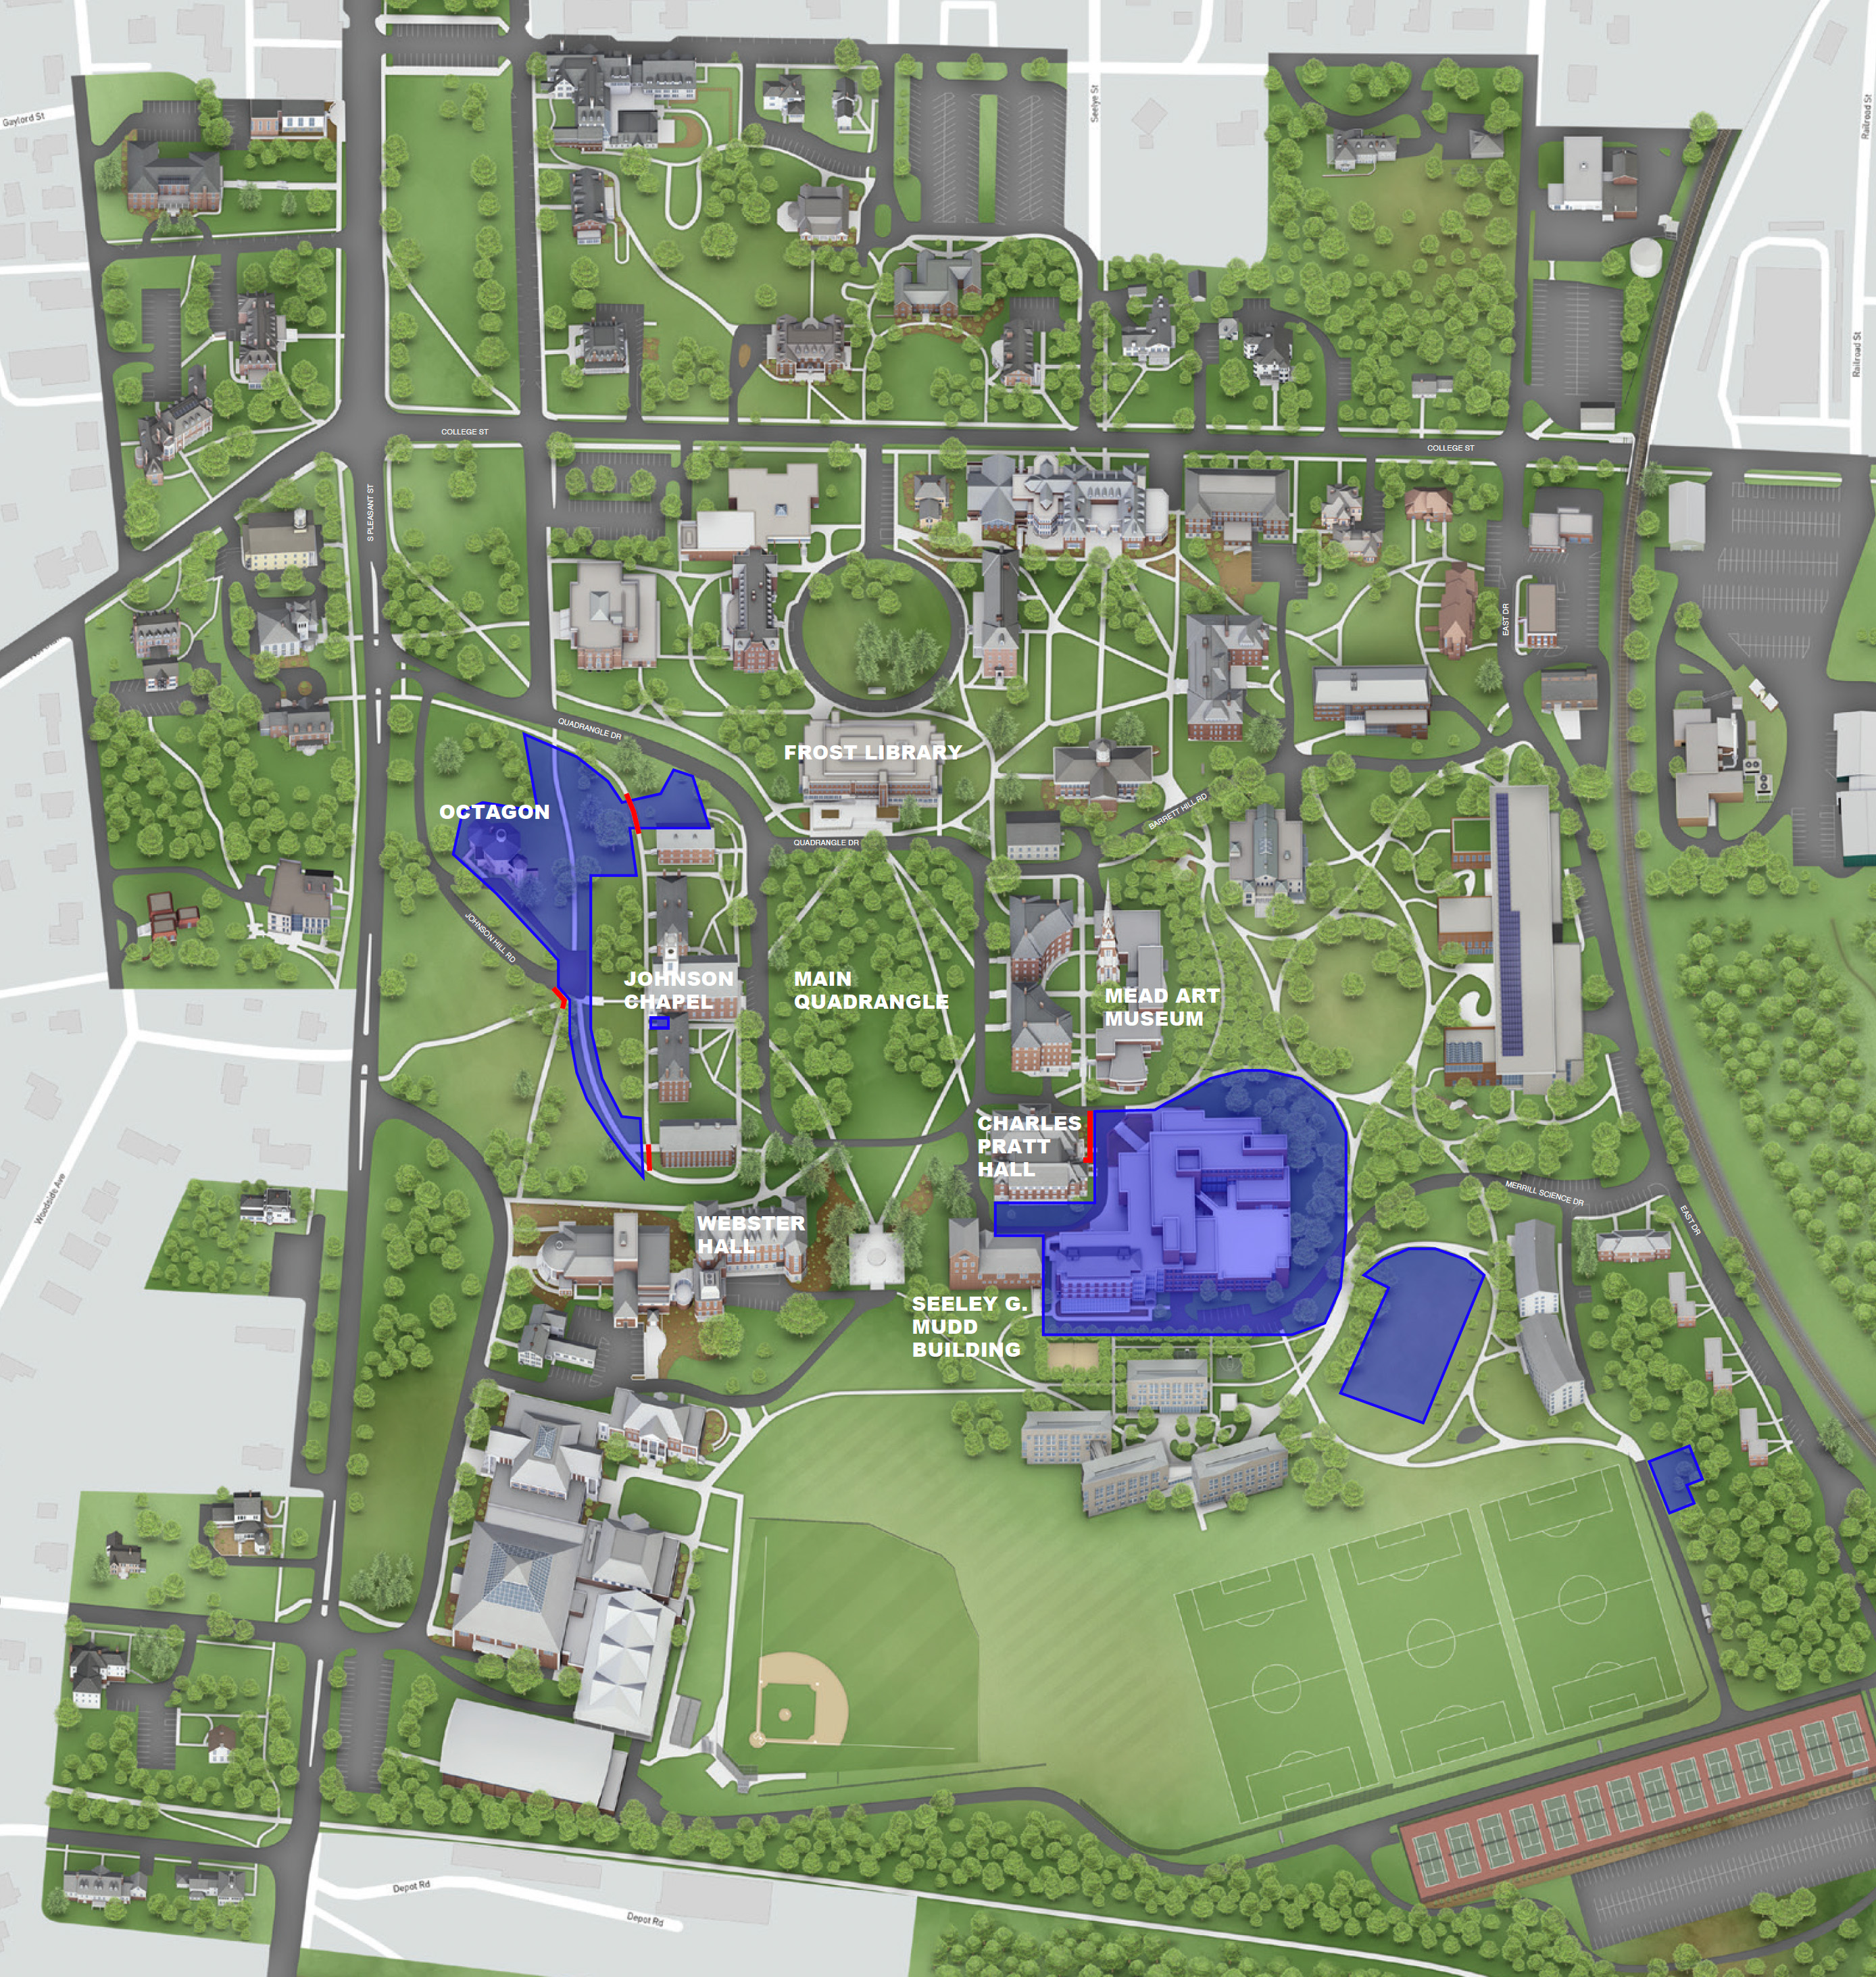 A map of campus with shaded areas as described within the accompanying text